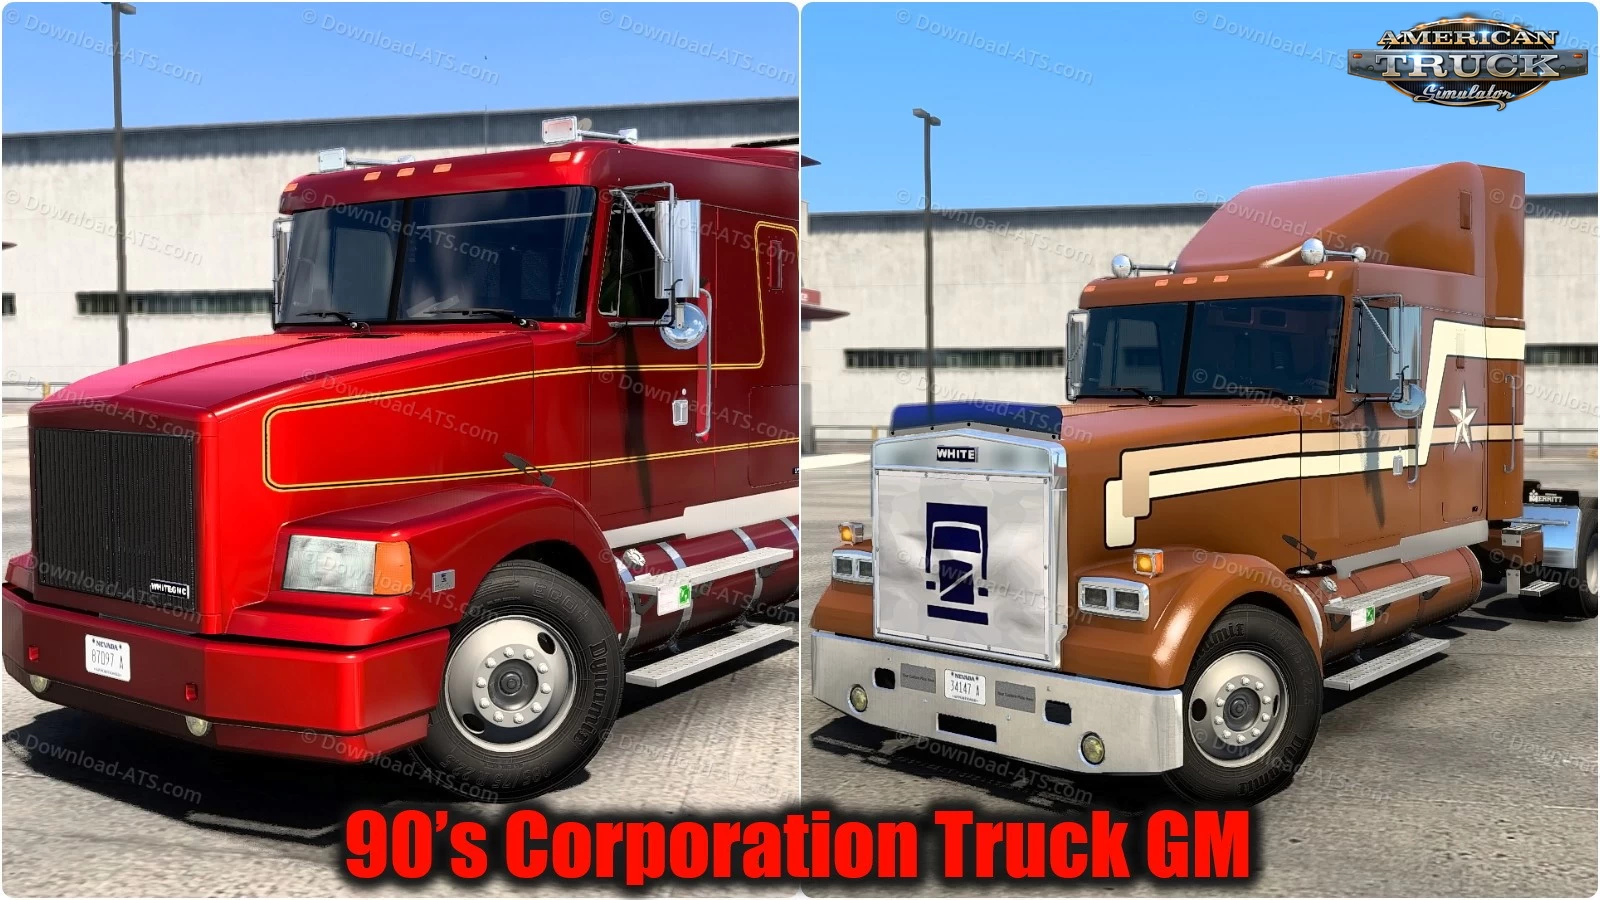 90’s Corporation Truck GM v2.0b (1.47.x) for ATS